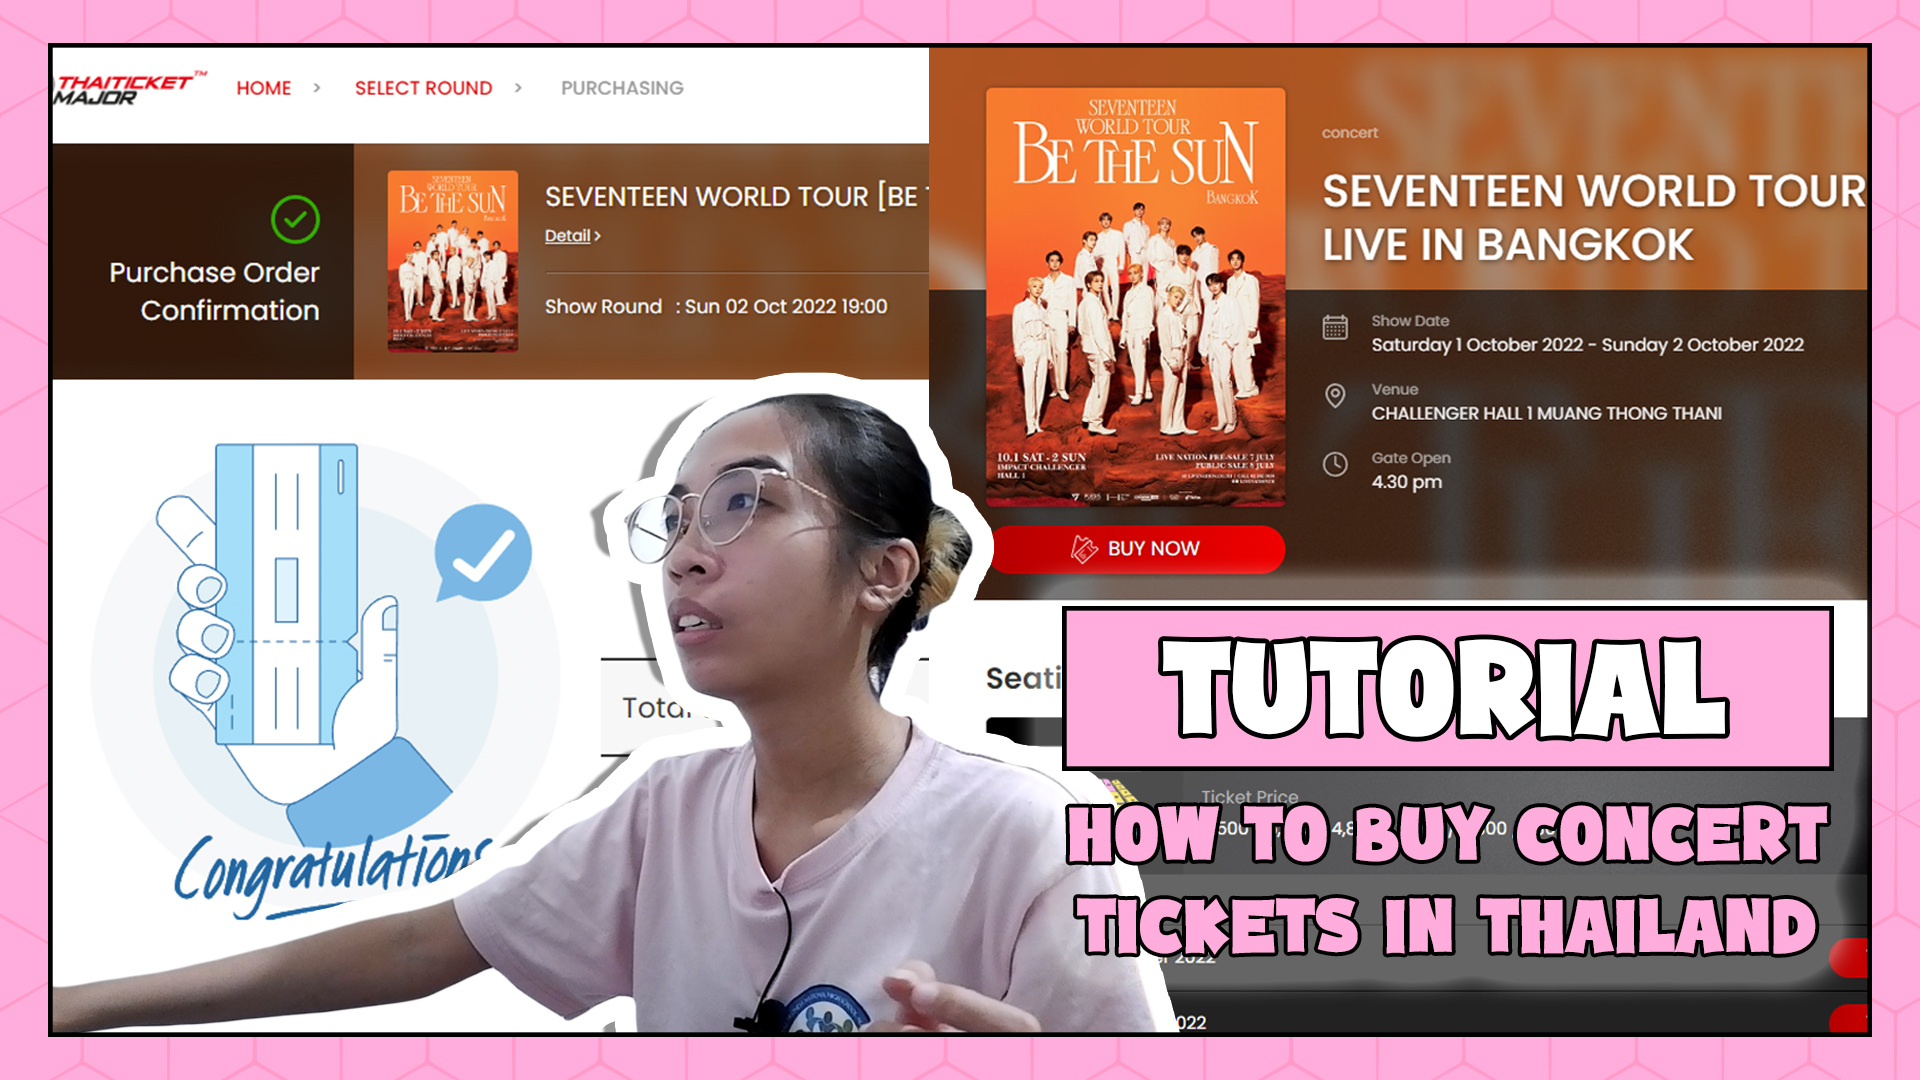 Now You Can Buy Concert Tickets Directly from